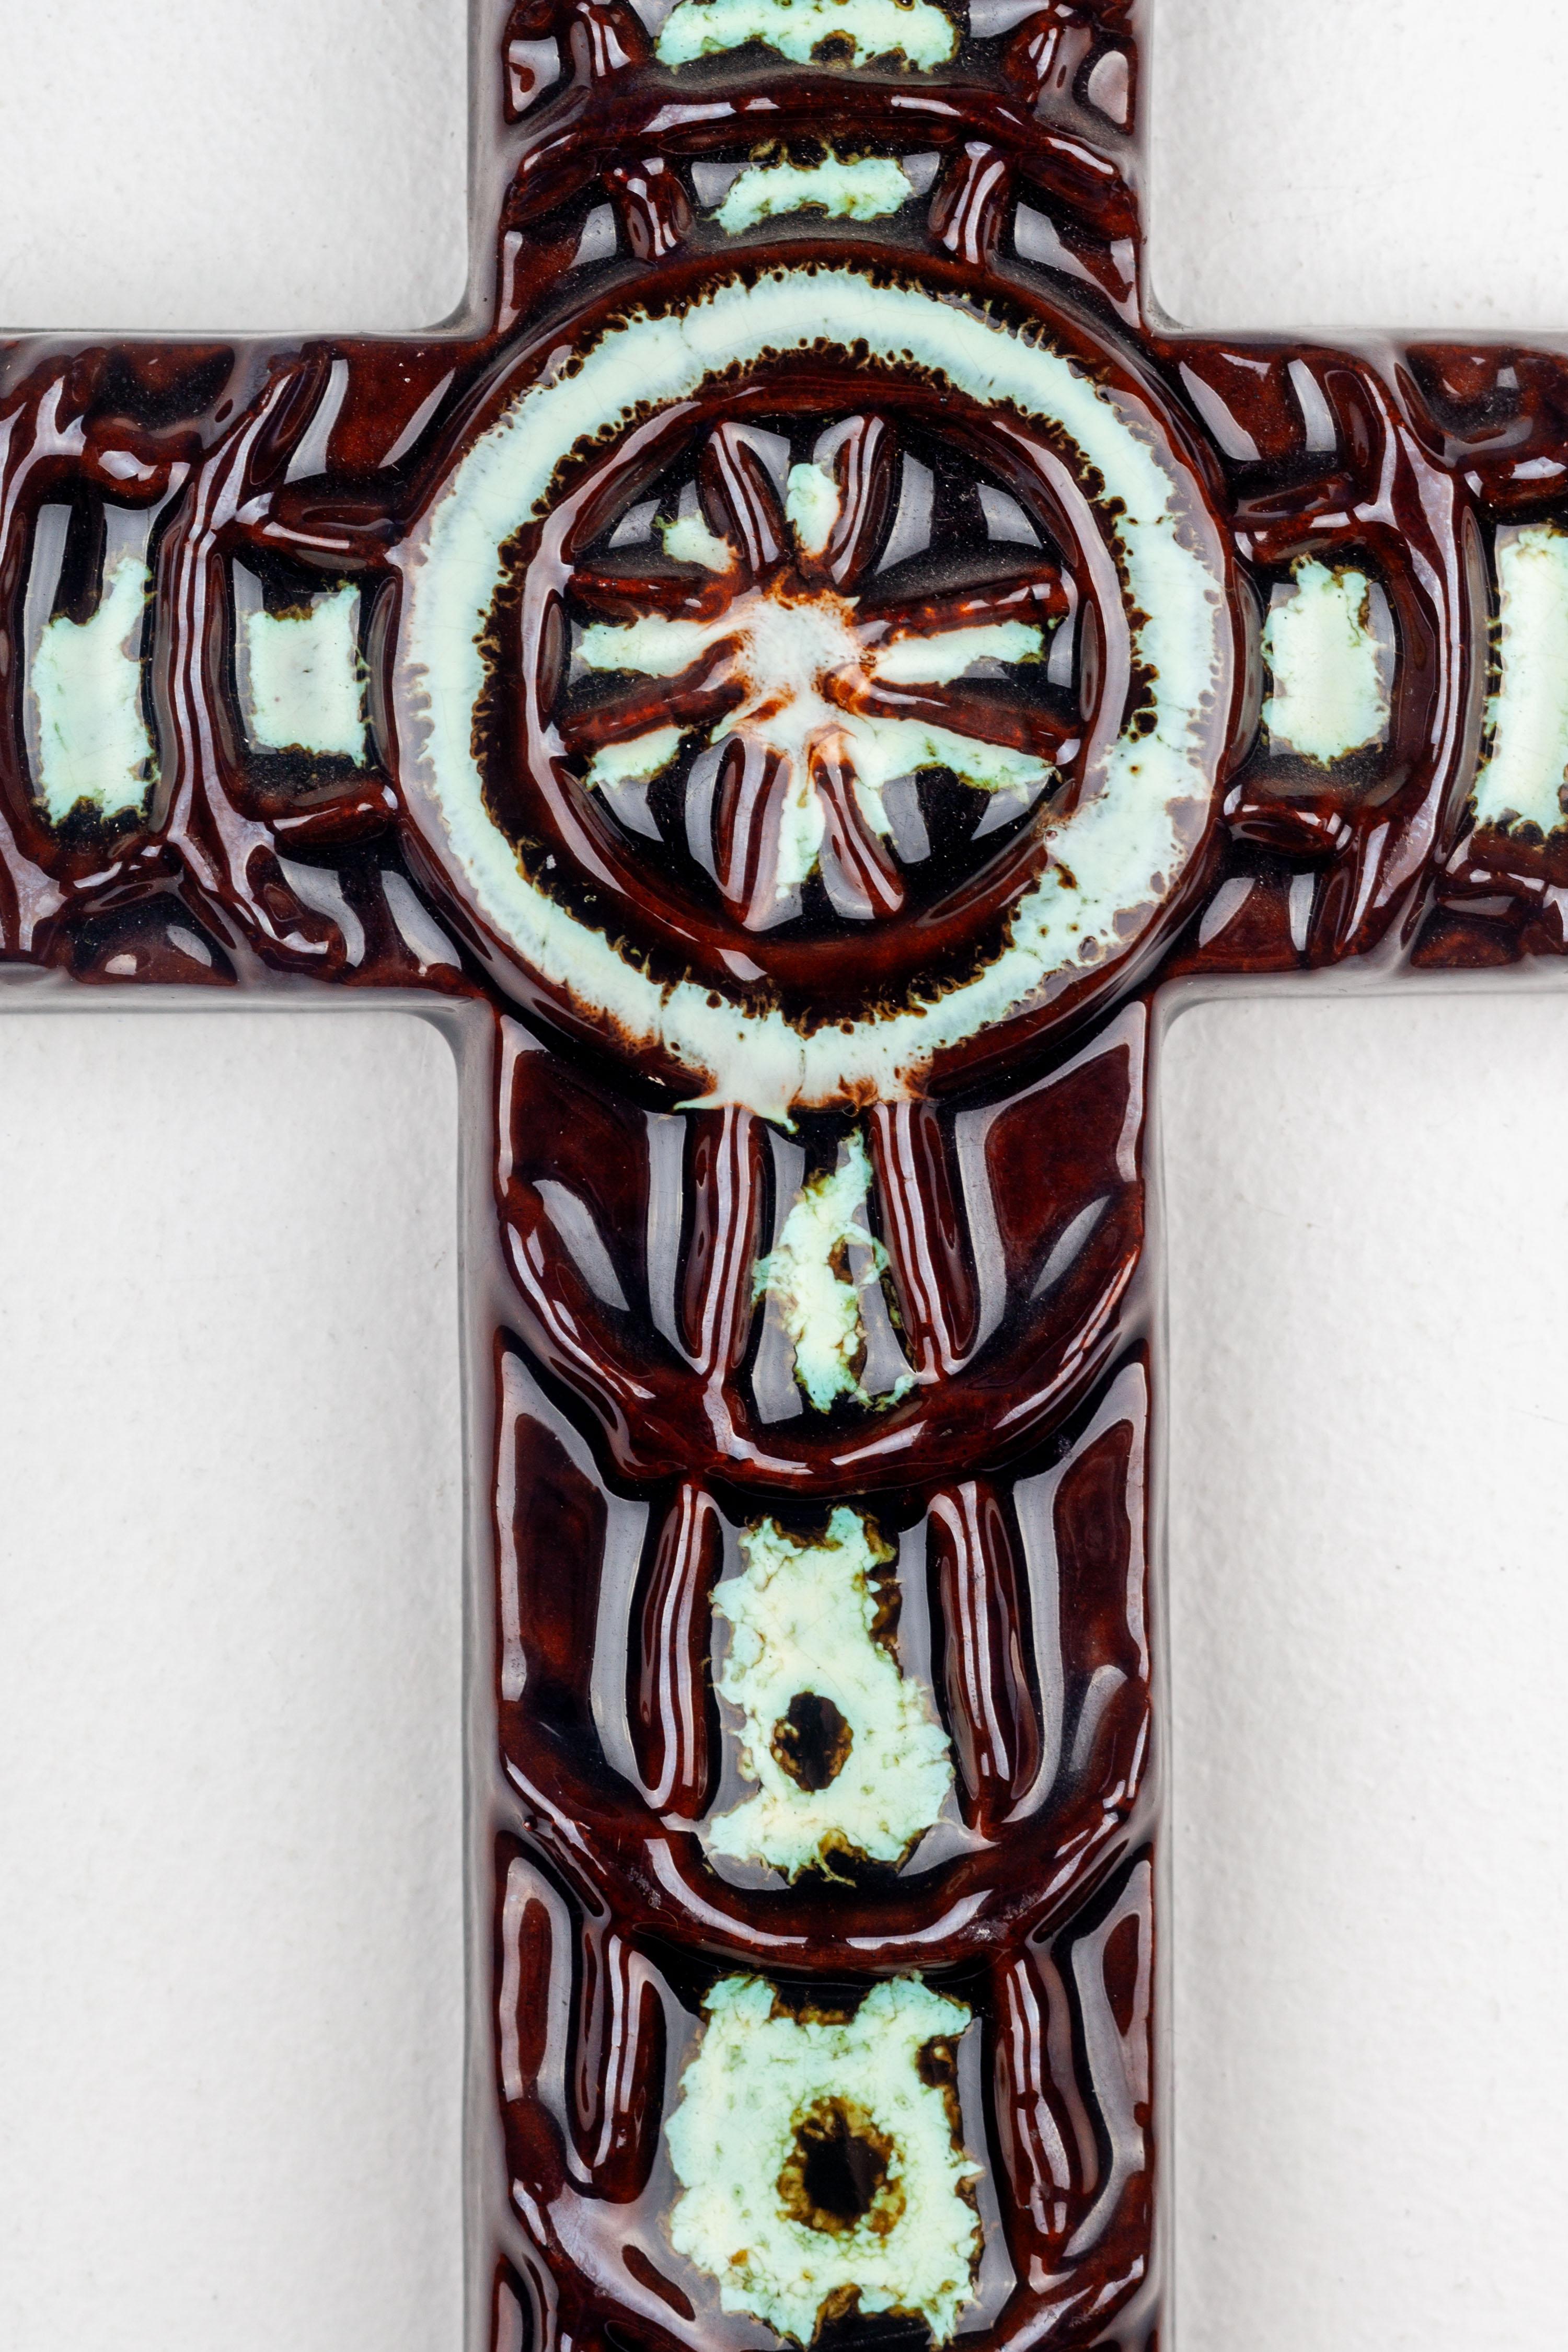 This handmade ceramic wall cross, crafted in Europe during the midcentury period, exemplifies the Brutalist aesthetic. Adorned with concentric circles relief in glossy brown and light green colors, the cross exhibits a simple yet impactful